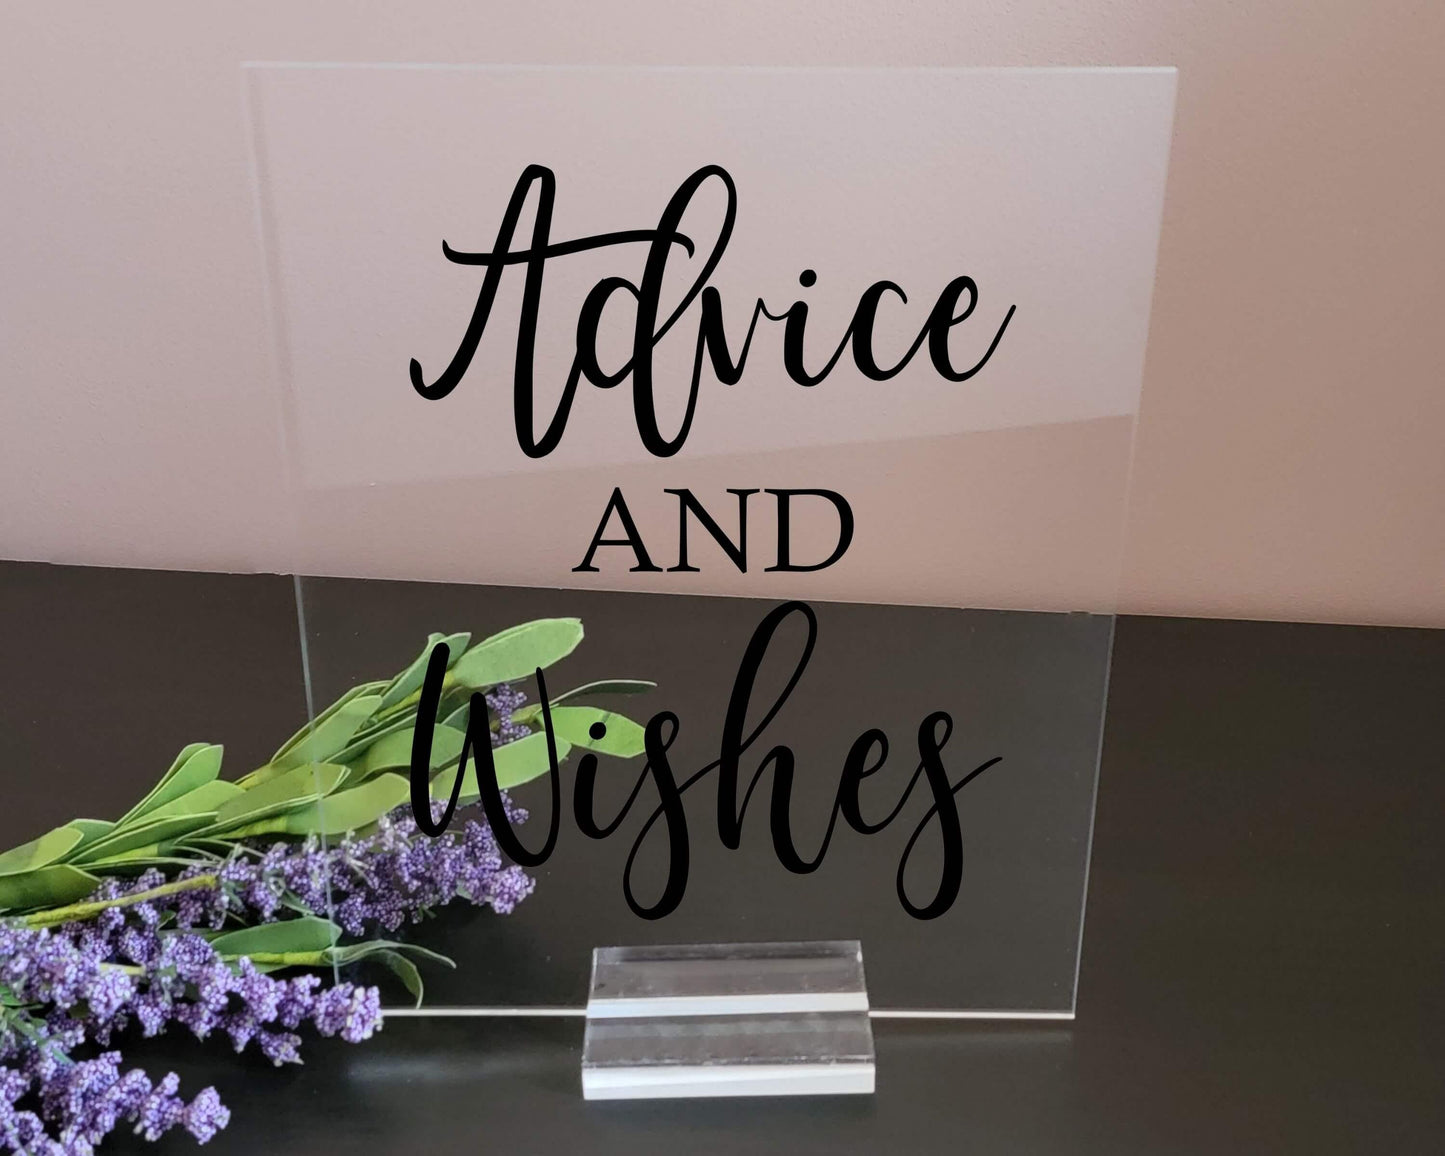 Advice and Wishes Acrylic Sign with Clear Background | 8 X 10" - Crystal Rose Design Co.